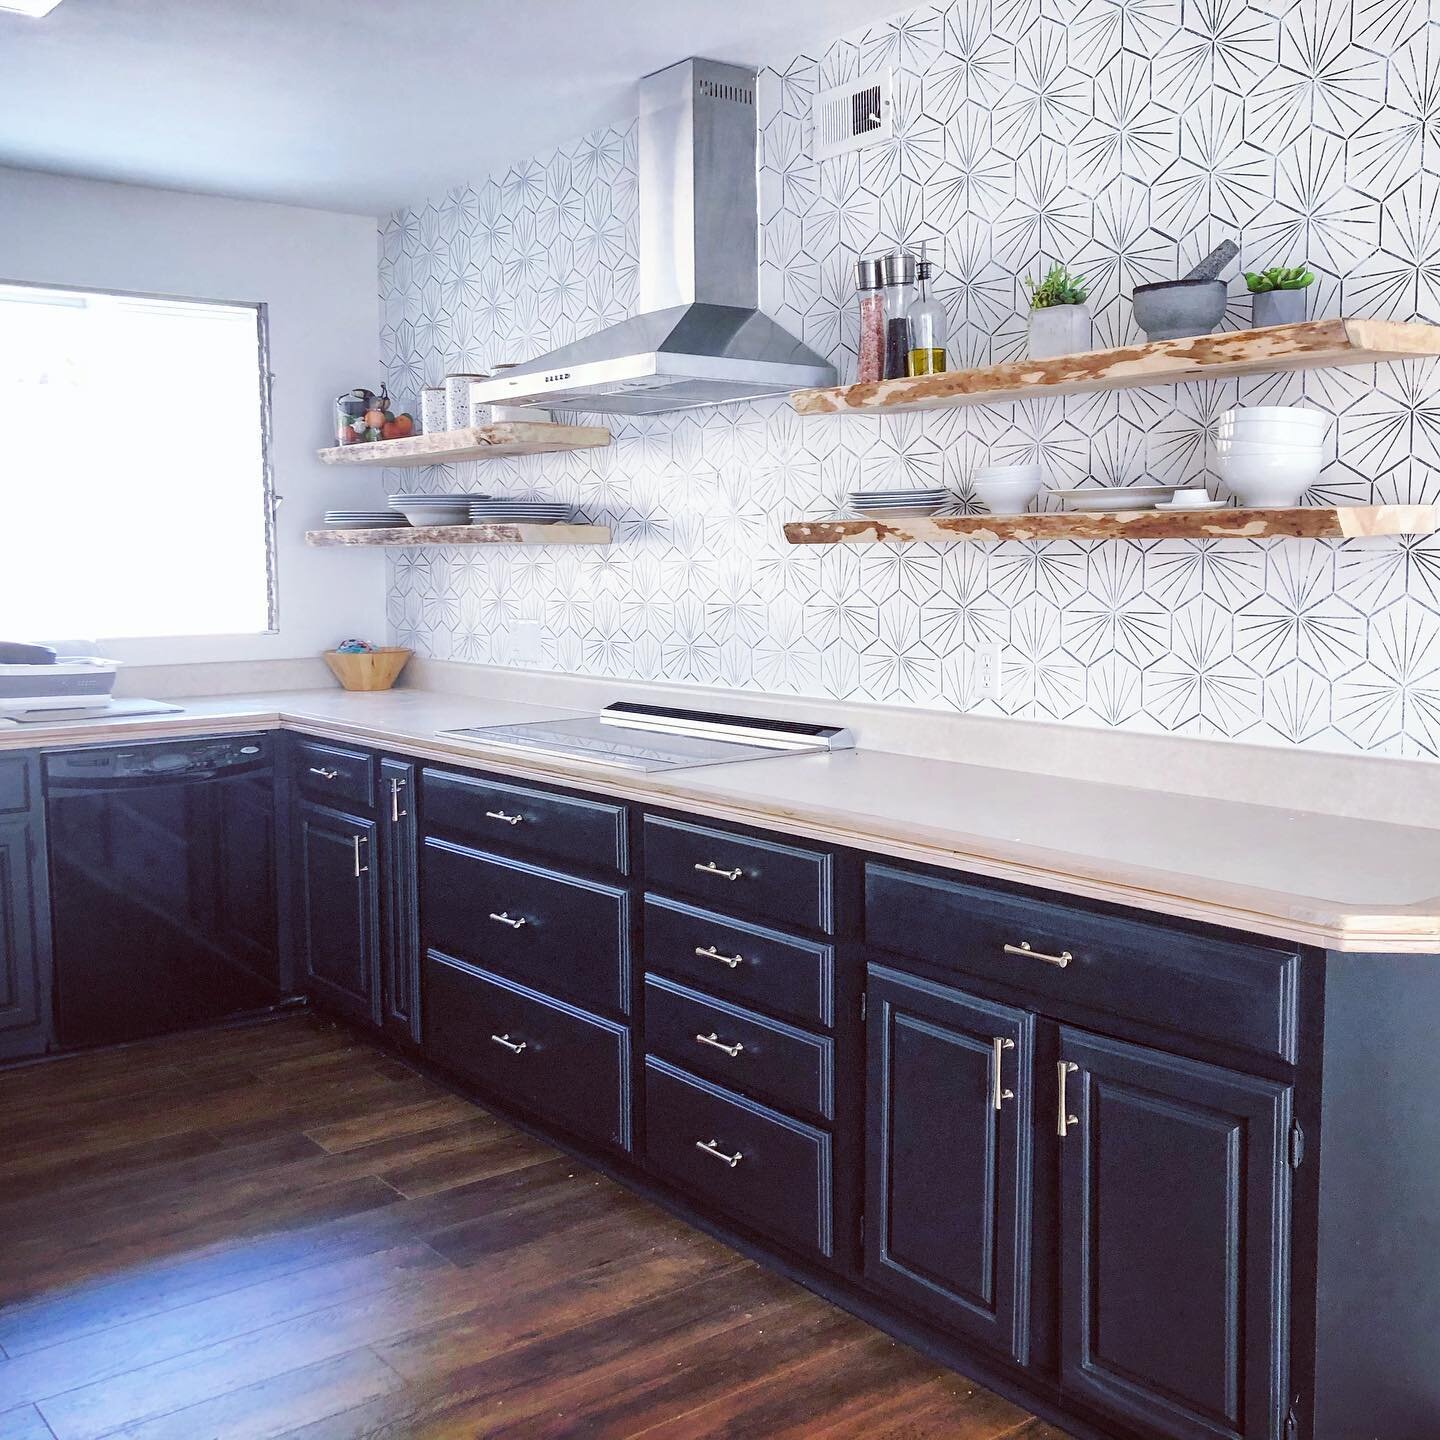 Excited to share this kitchen makeover! Swipe to see the Before &amp; After. 

Minimal Budget Project:

☑️Light Demo
☑️Refinished Kitchen Cabinets
☑️Painted Backsplash wall
☑️New hood cover
☑️New cabinet pulls
☑️Floating live edge shelves

#h2finishe